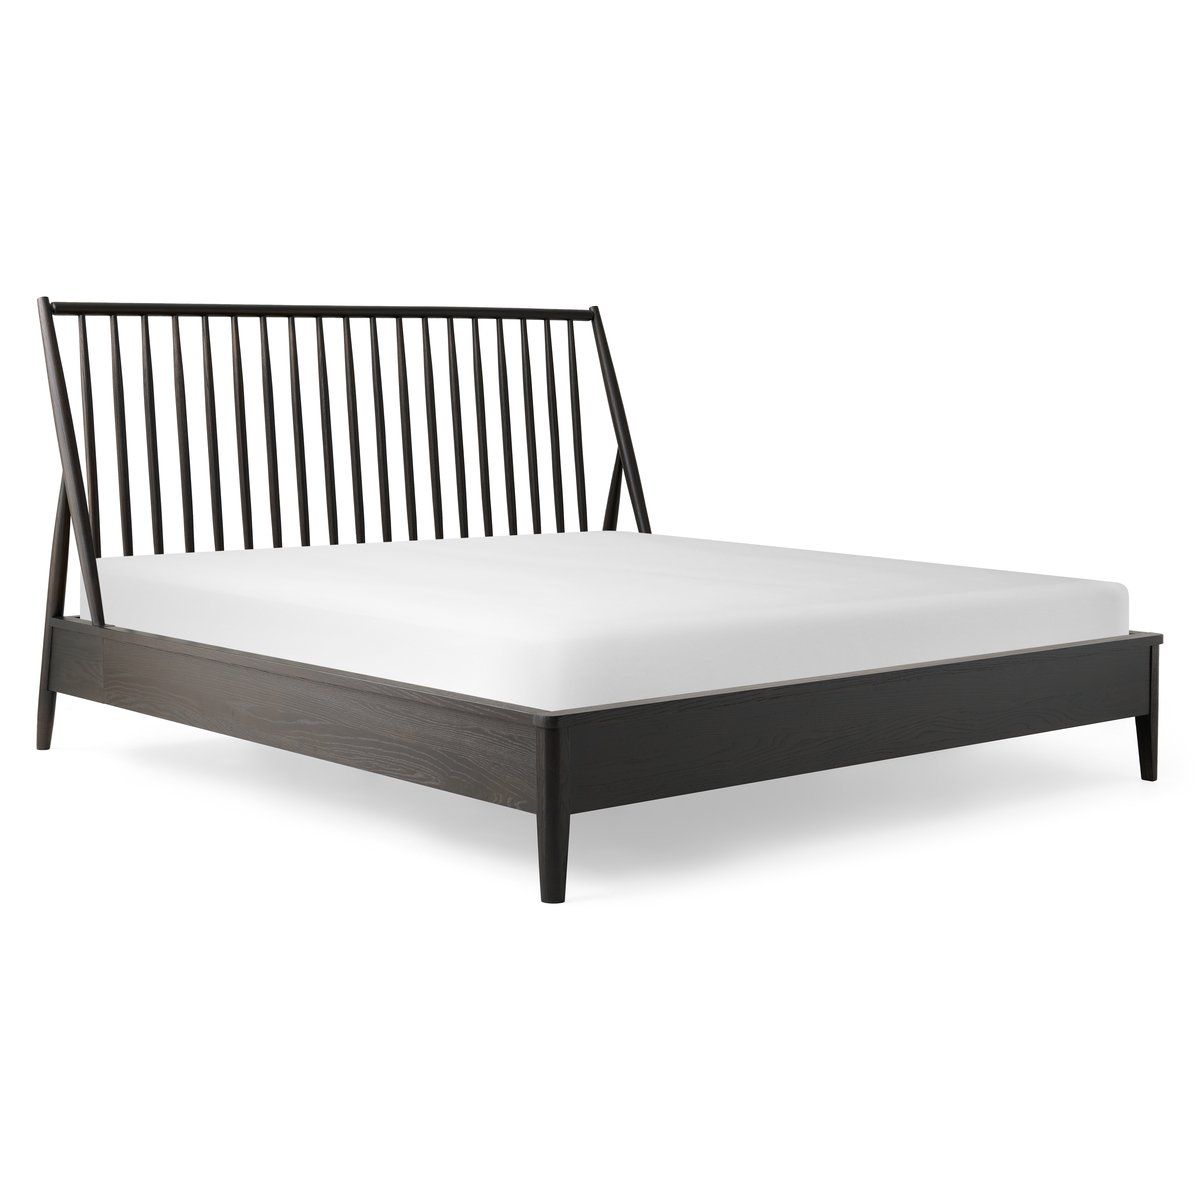 Bayside King Bed